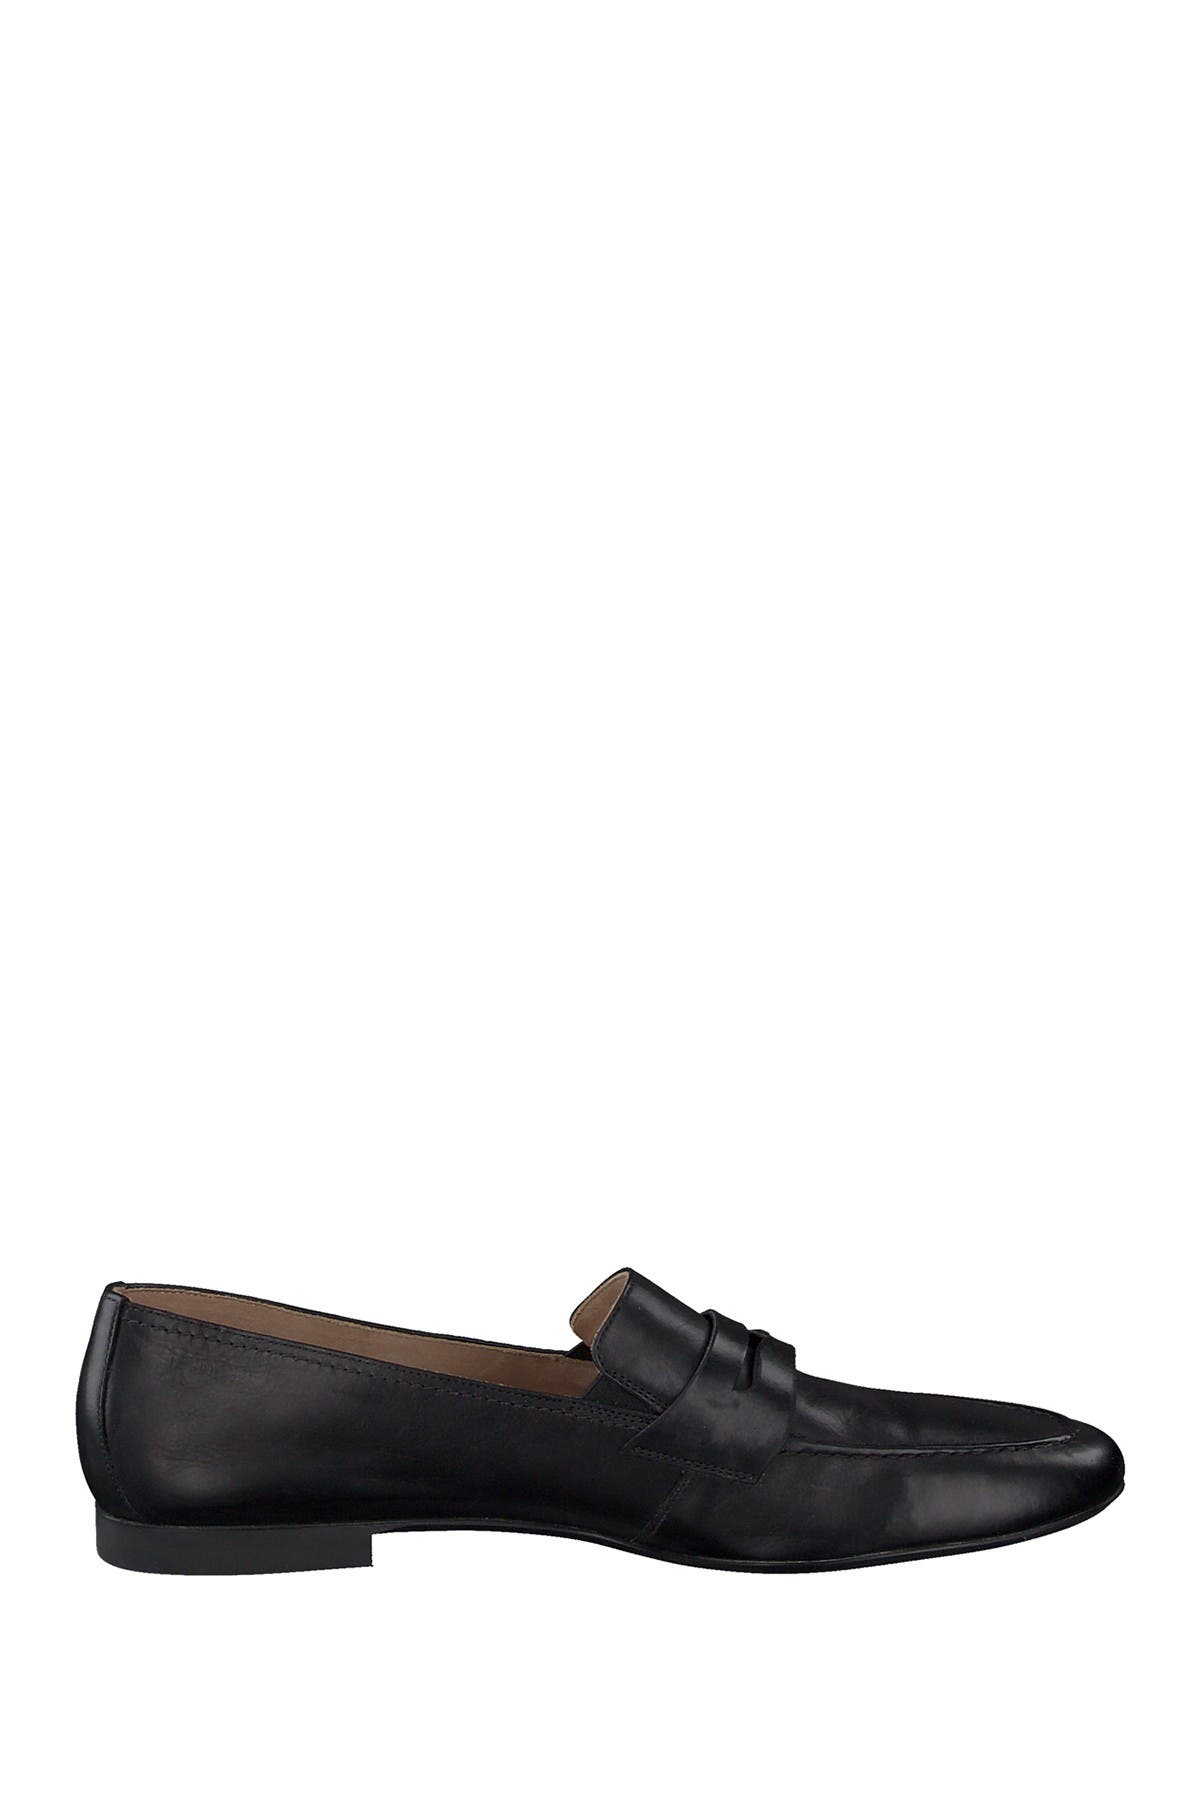 paul green loafers nordstrom